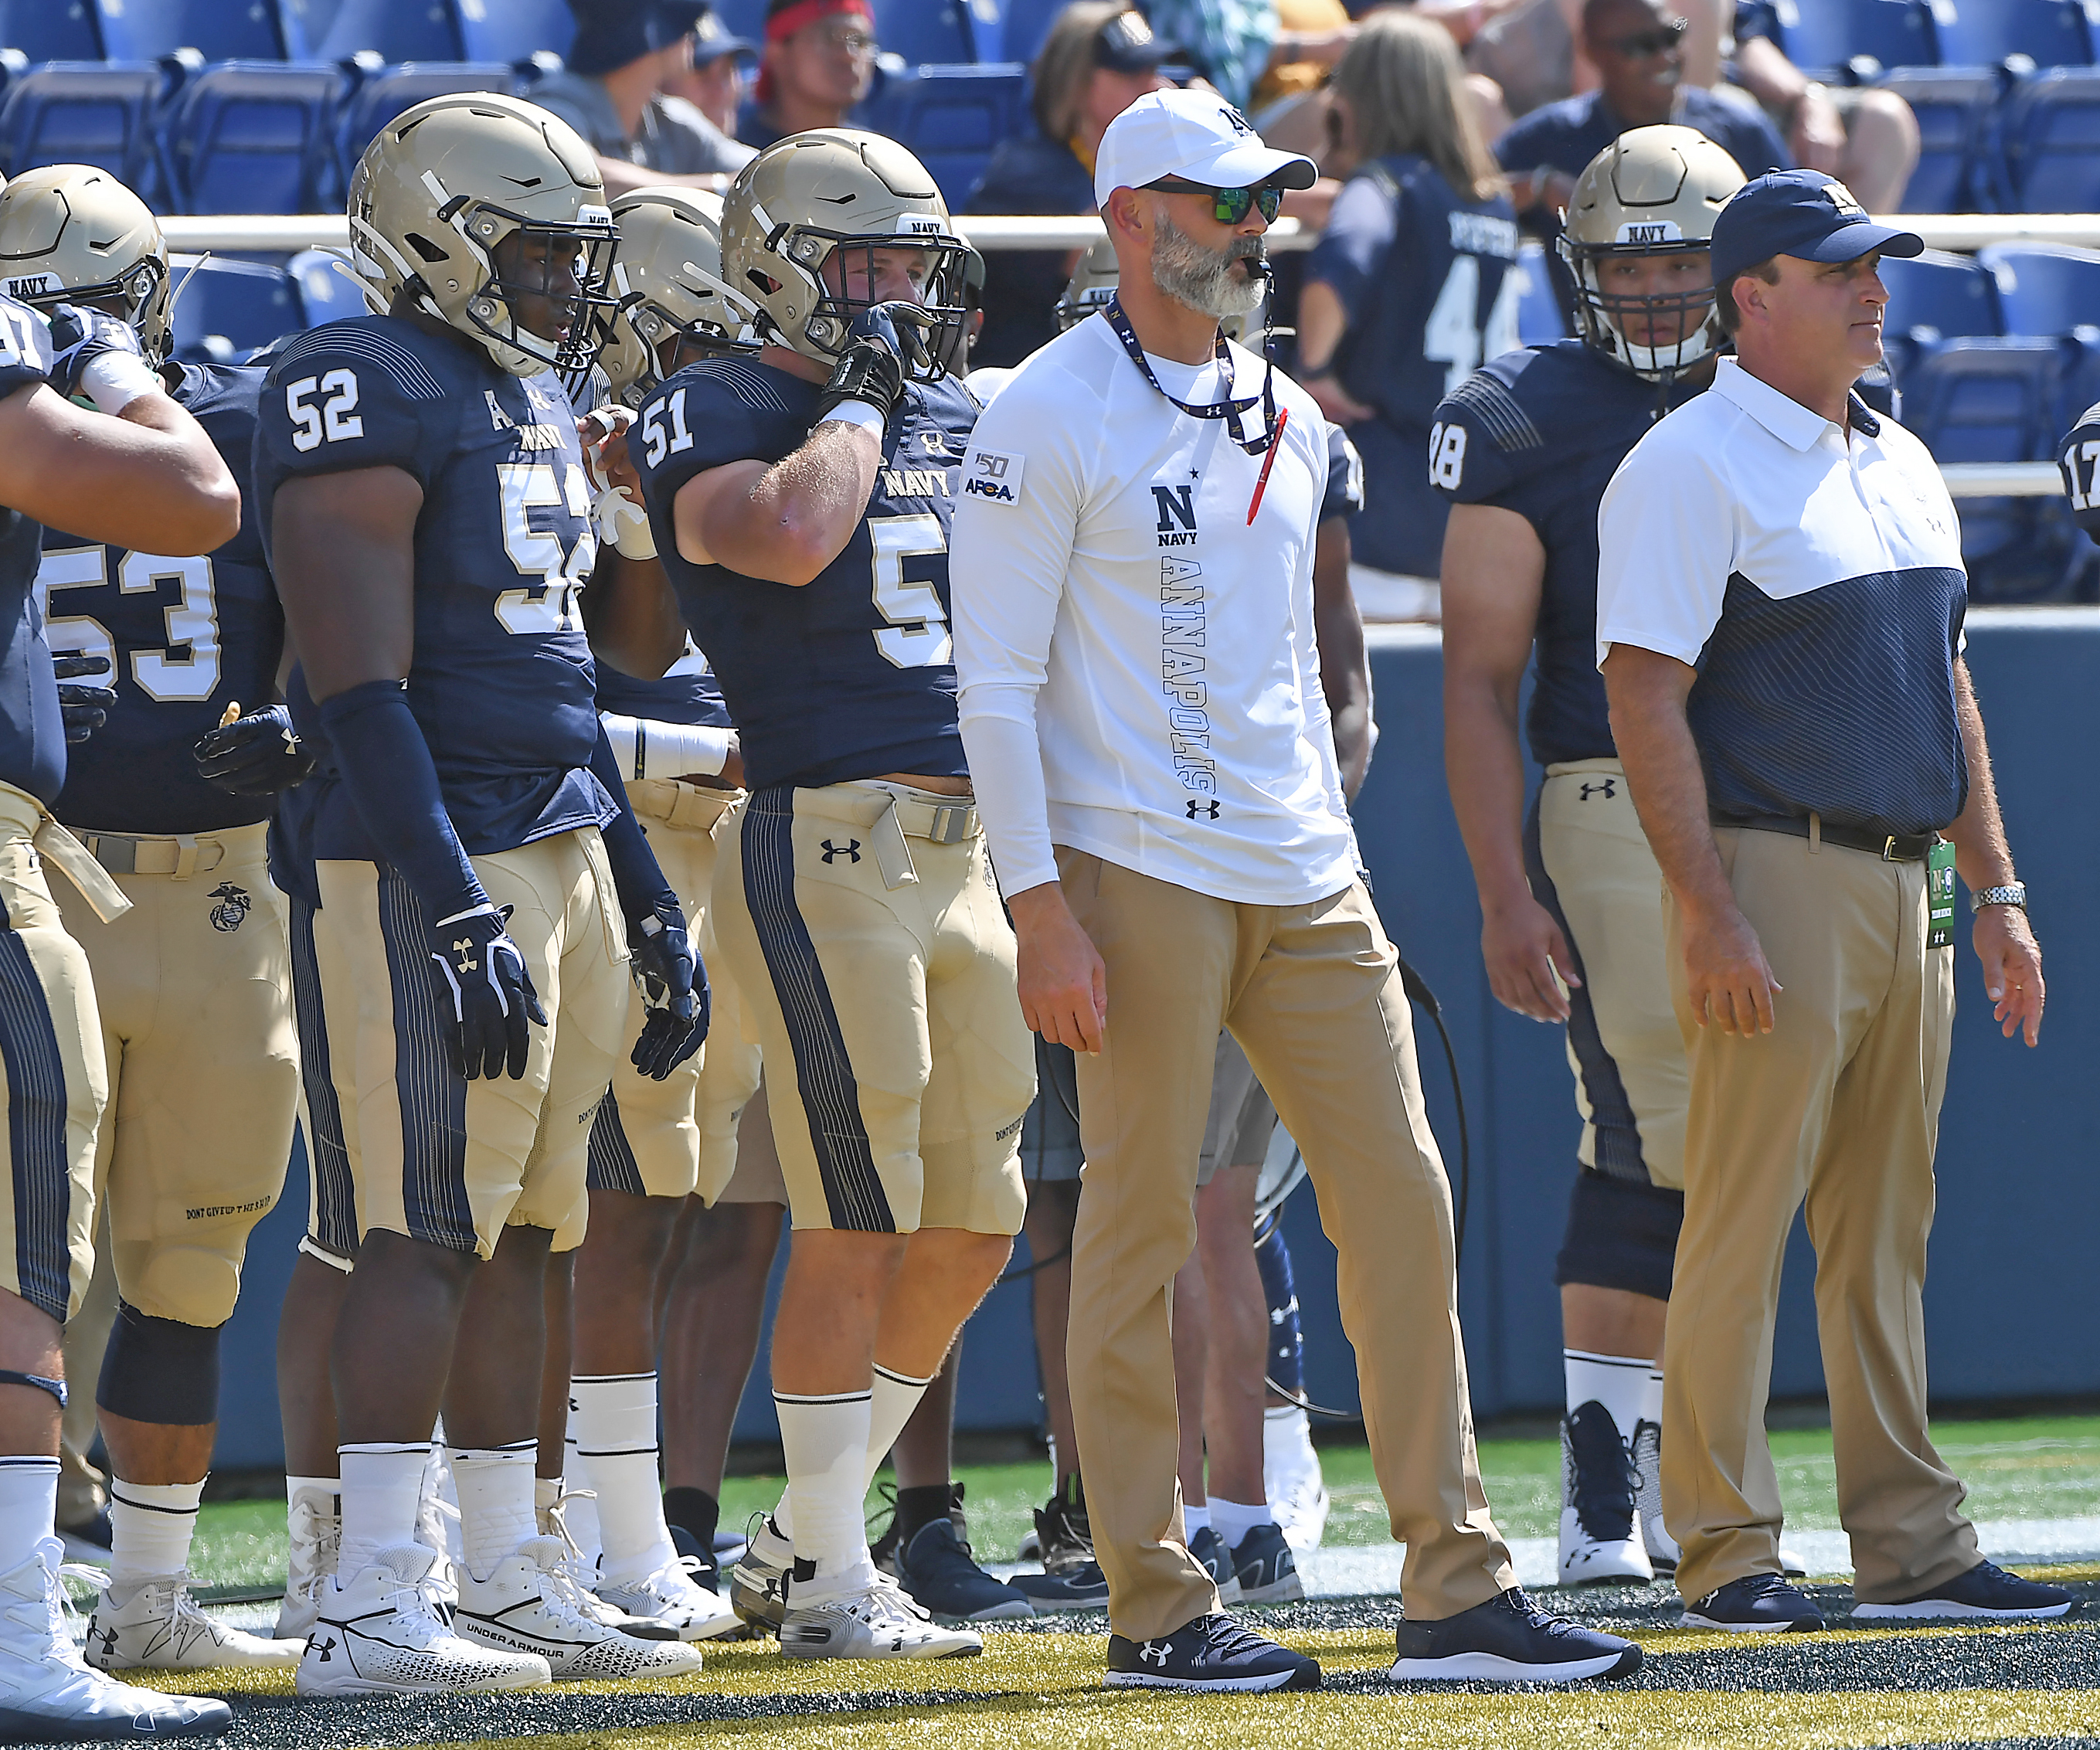 Bill Wagner: From Brian Newberry to Brian Bohannon, a list of potential  candidates to become Navy football coach | COMMENTARY – Capital Gazette